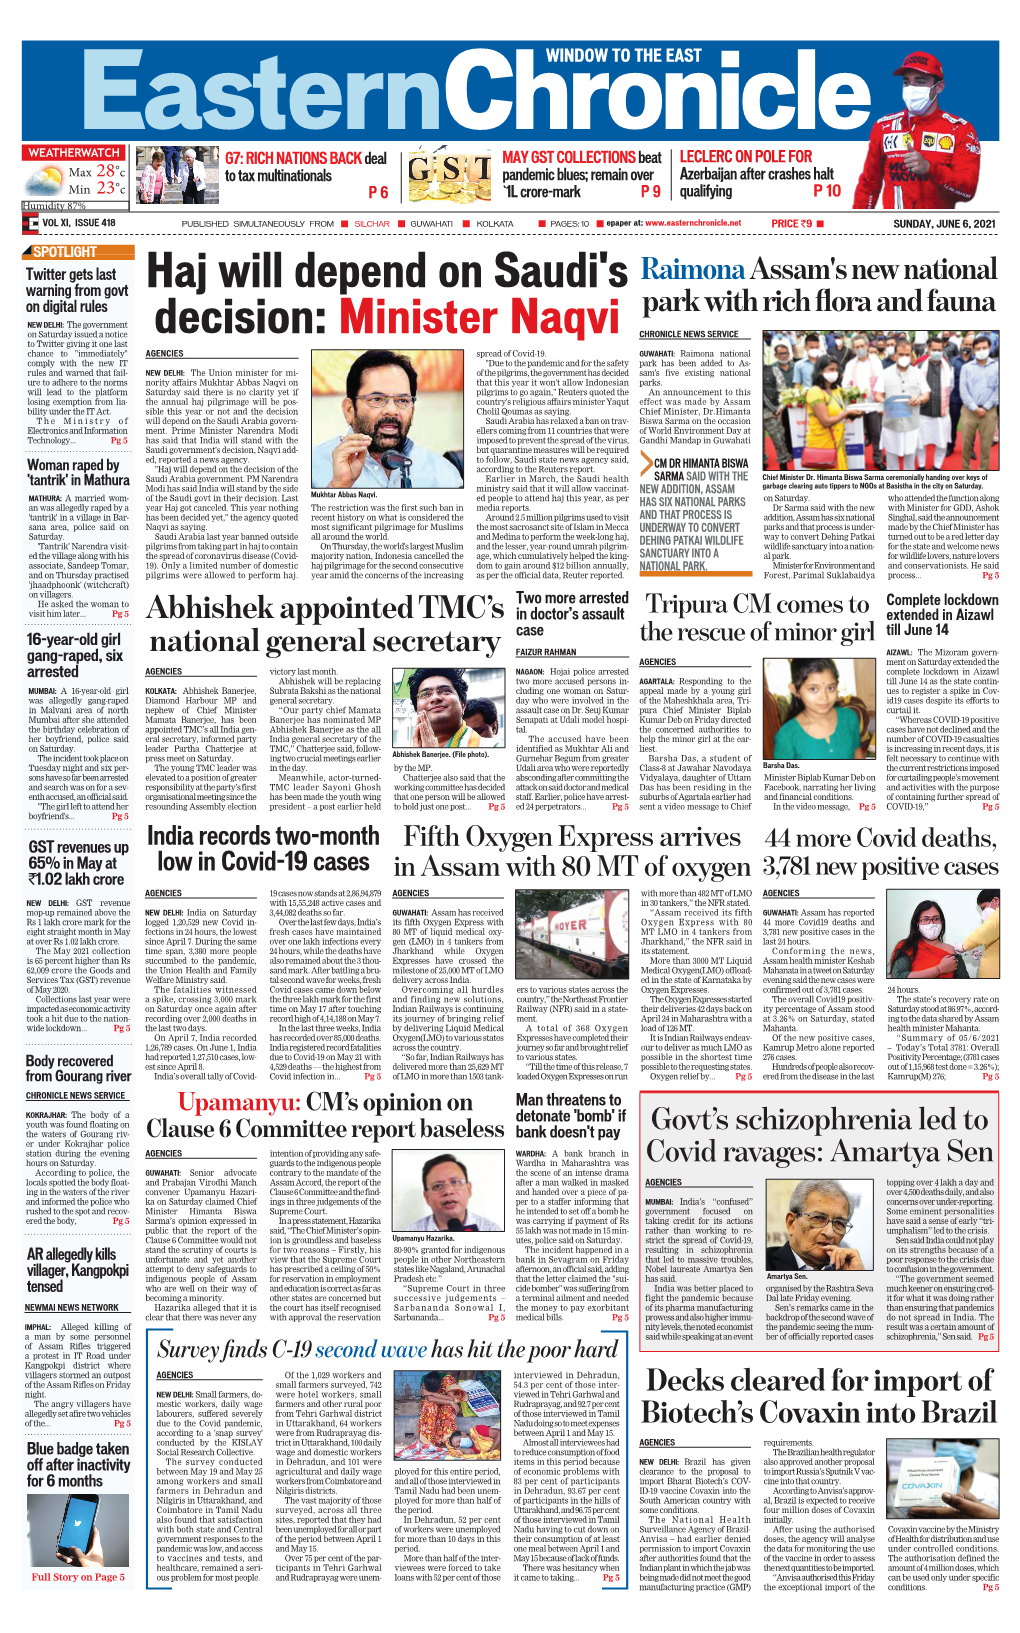 Minister Naqvi CHRONICLE NEWS SERVICE to Twitter Giving It One Last Chance to "Immediately" AGENCIES Spread of Covid-19